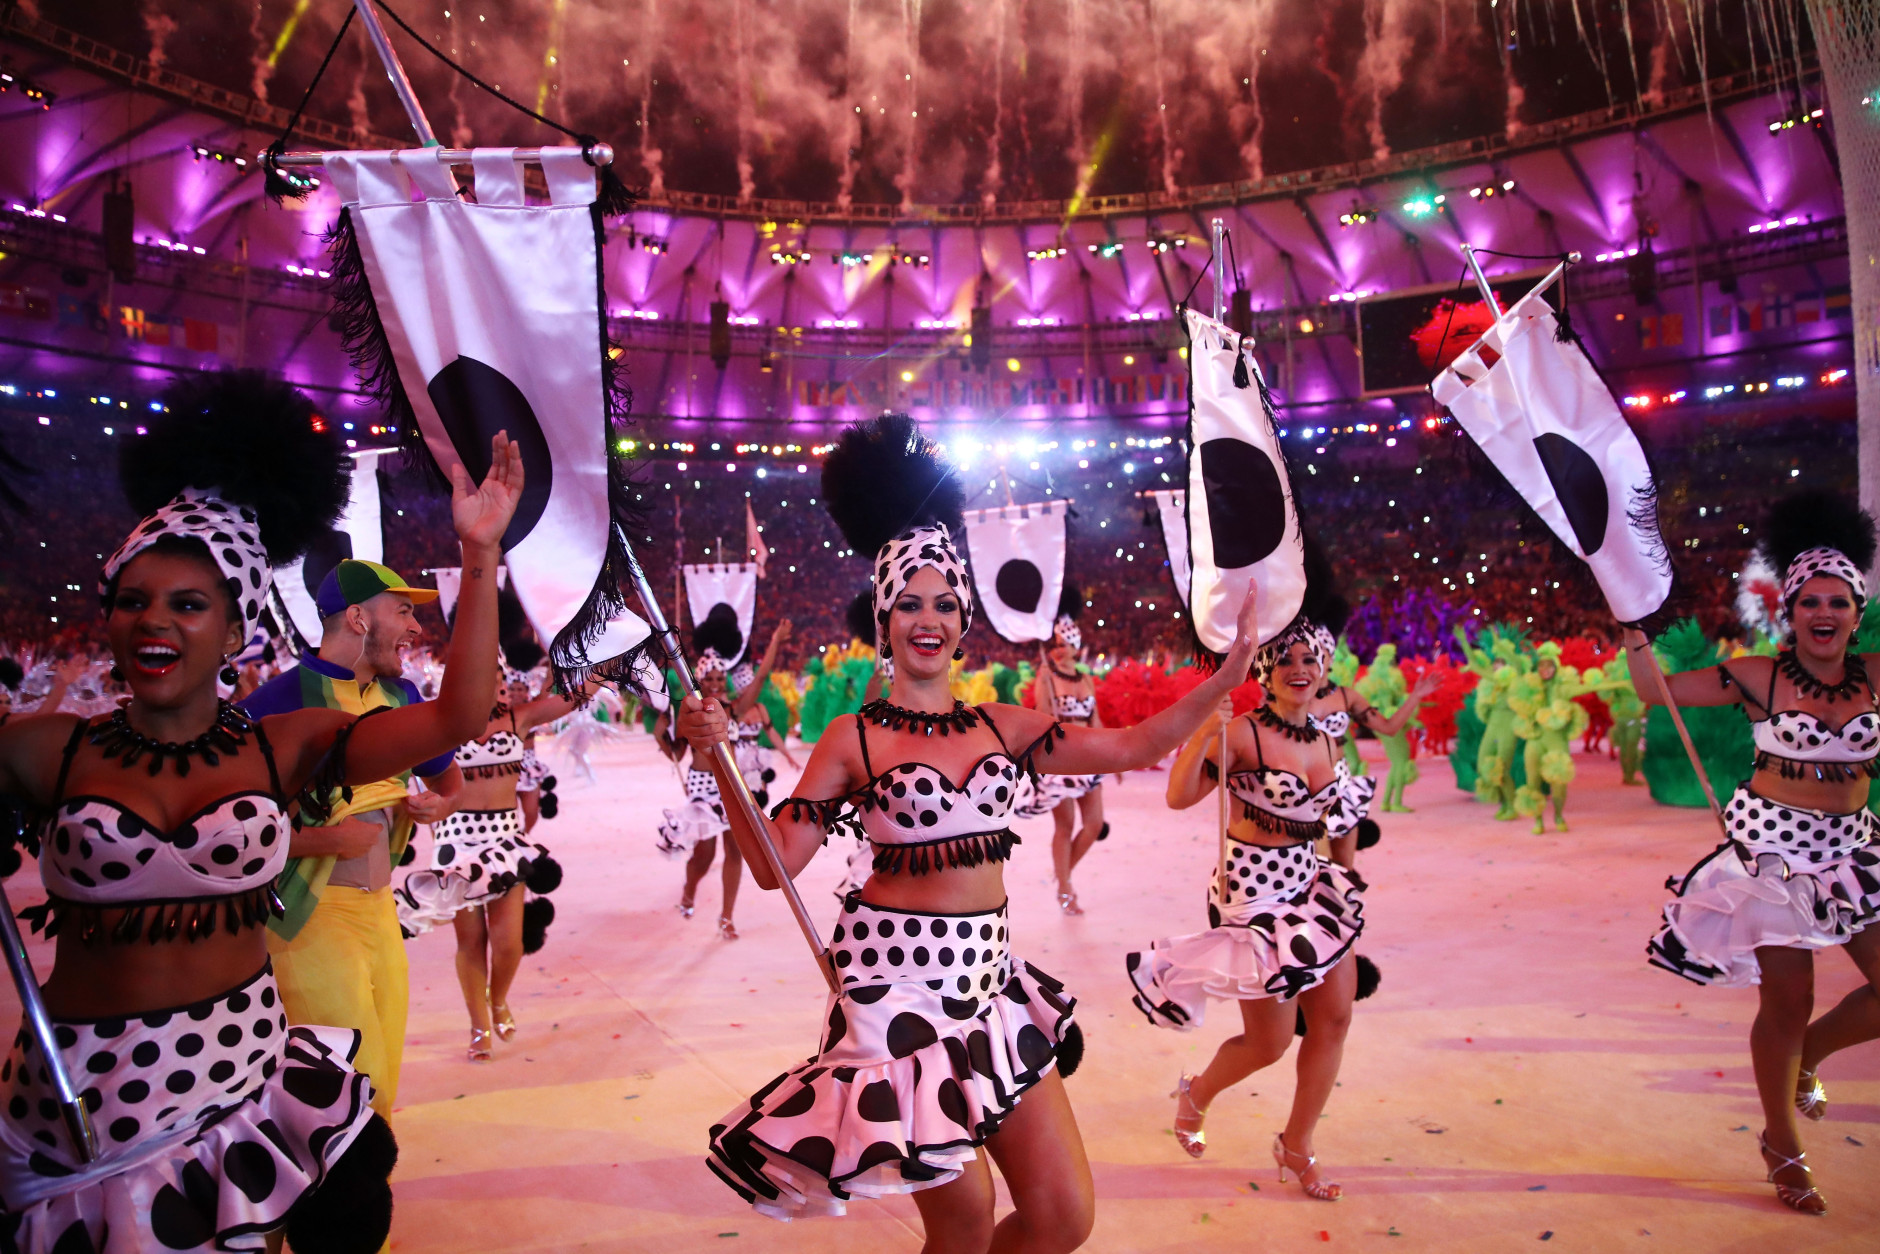 RIO DE JANEIRO, BRAZIL - AUGUST 21:  Dancers perform during the Closing Ceremony on Day 16 of the Rio 2016 Olympic Games at Maracana Stadium on August 21, 2016 in Rio de Janeiro, Brazil.  (Photo by Cameron Spencer/Getty Images)